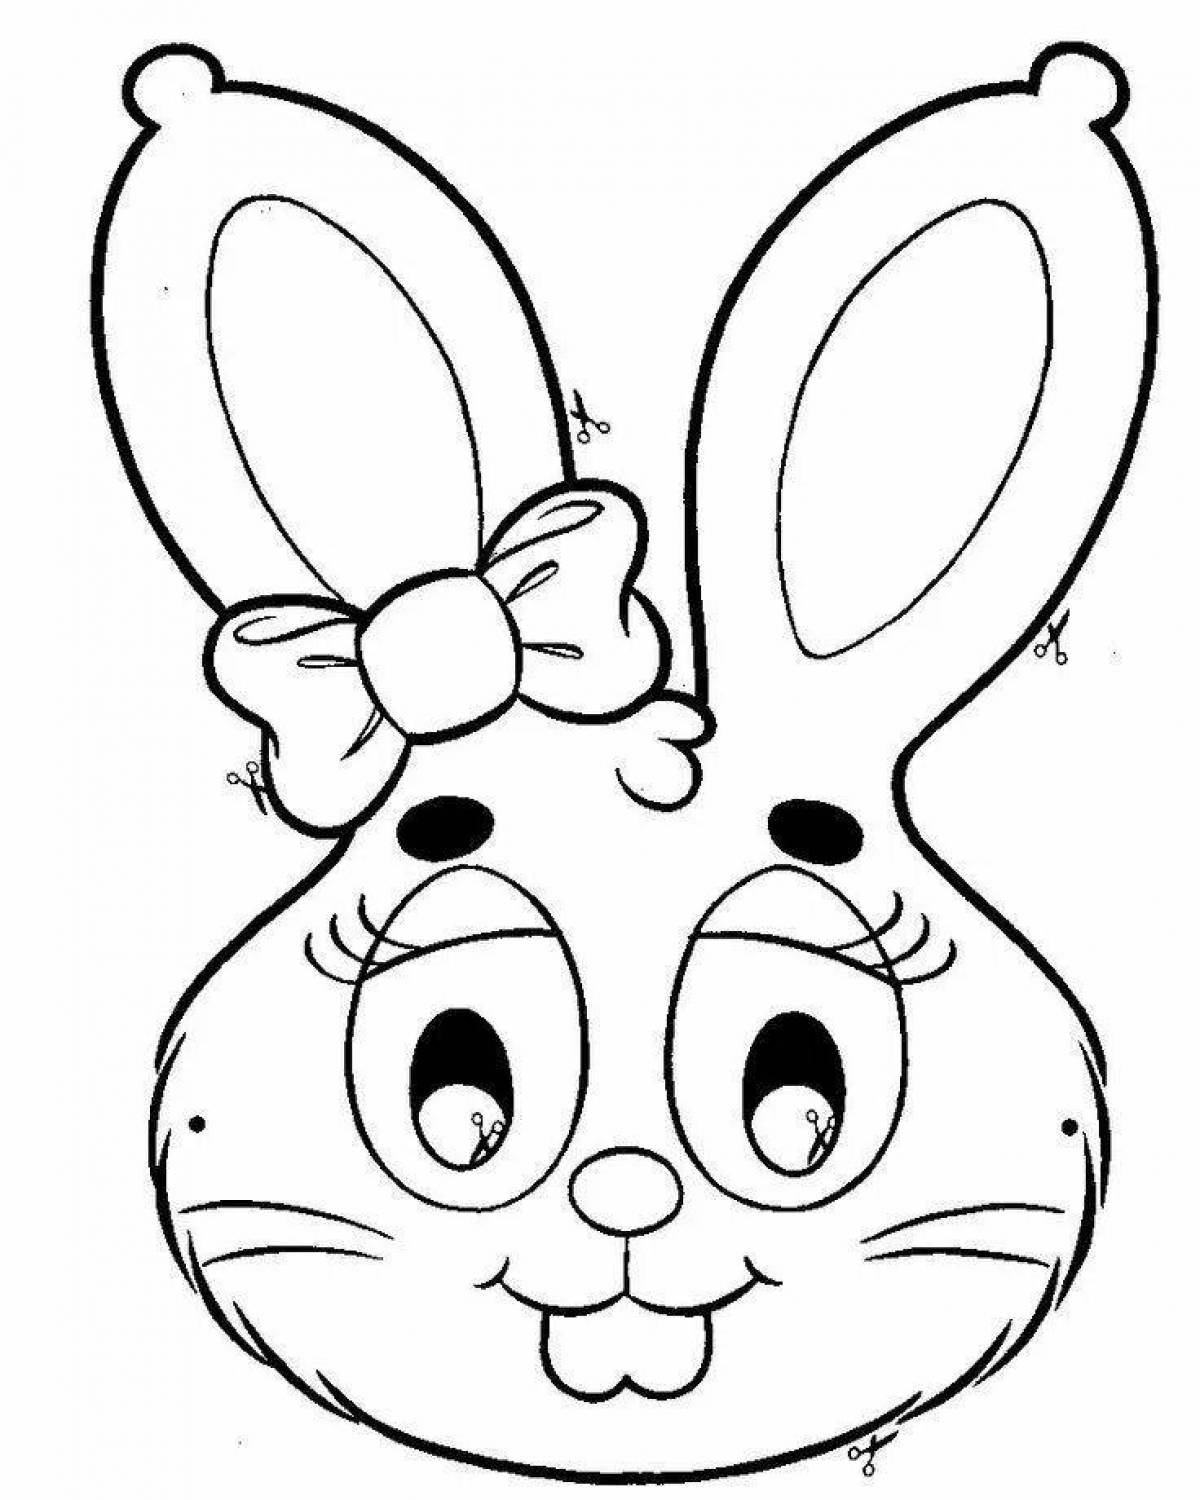 Coloring page fascinating hare mask